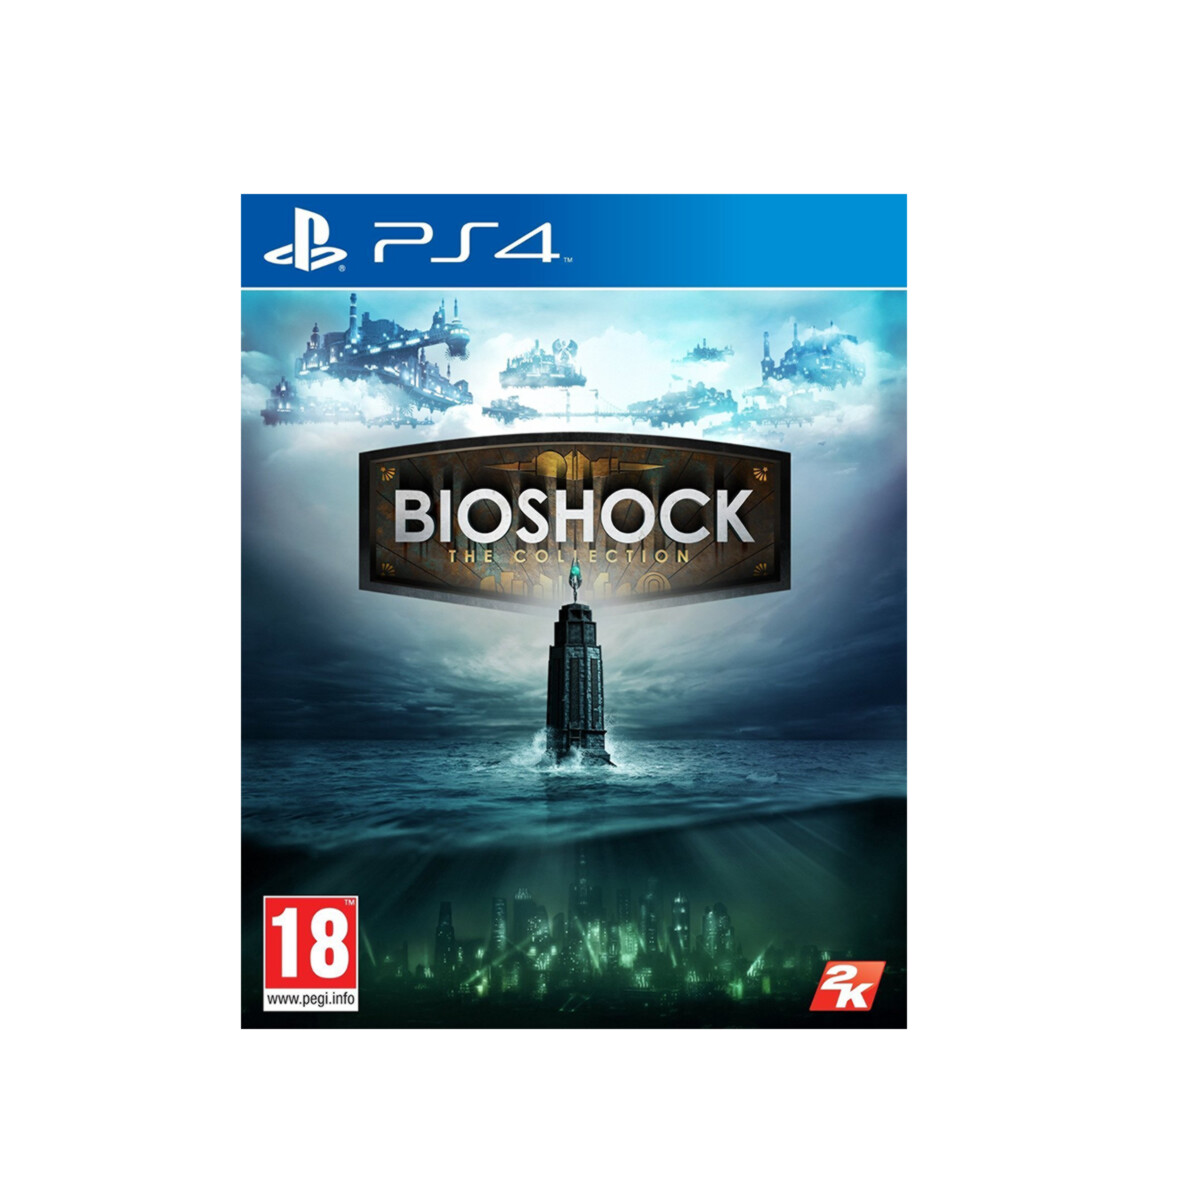 PS4 BIOSHOCK THE COLLECTION 